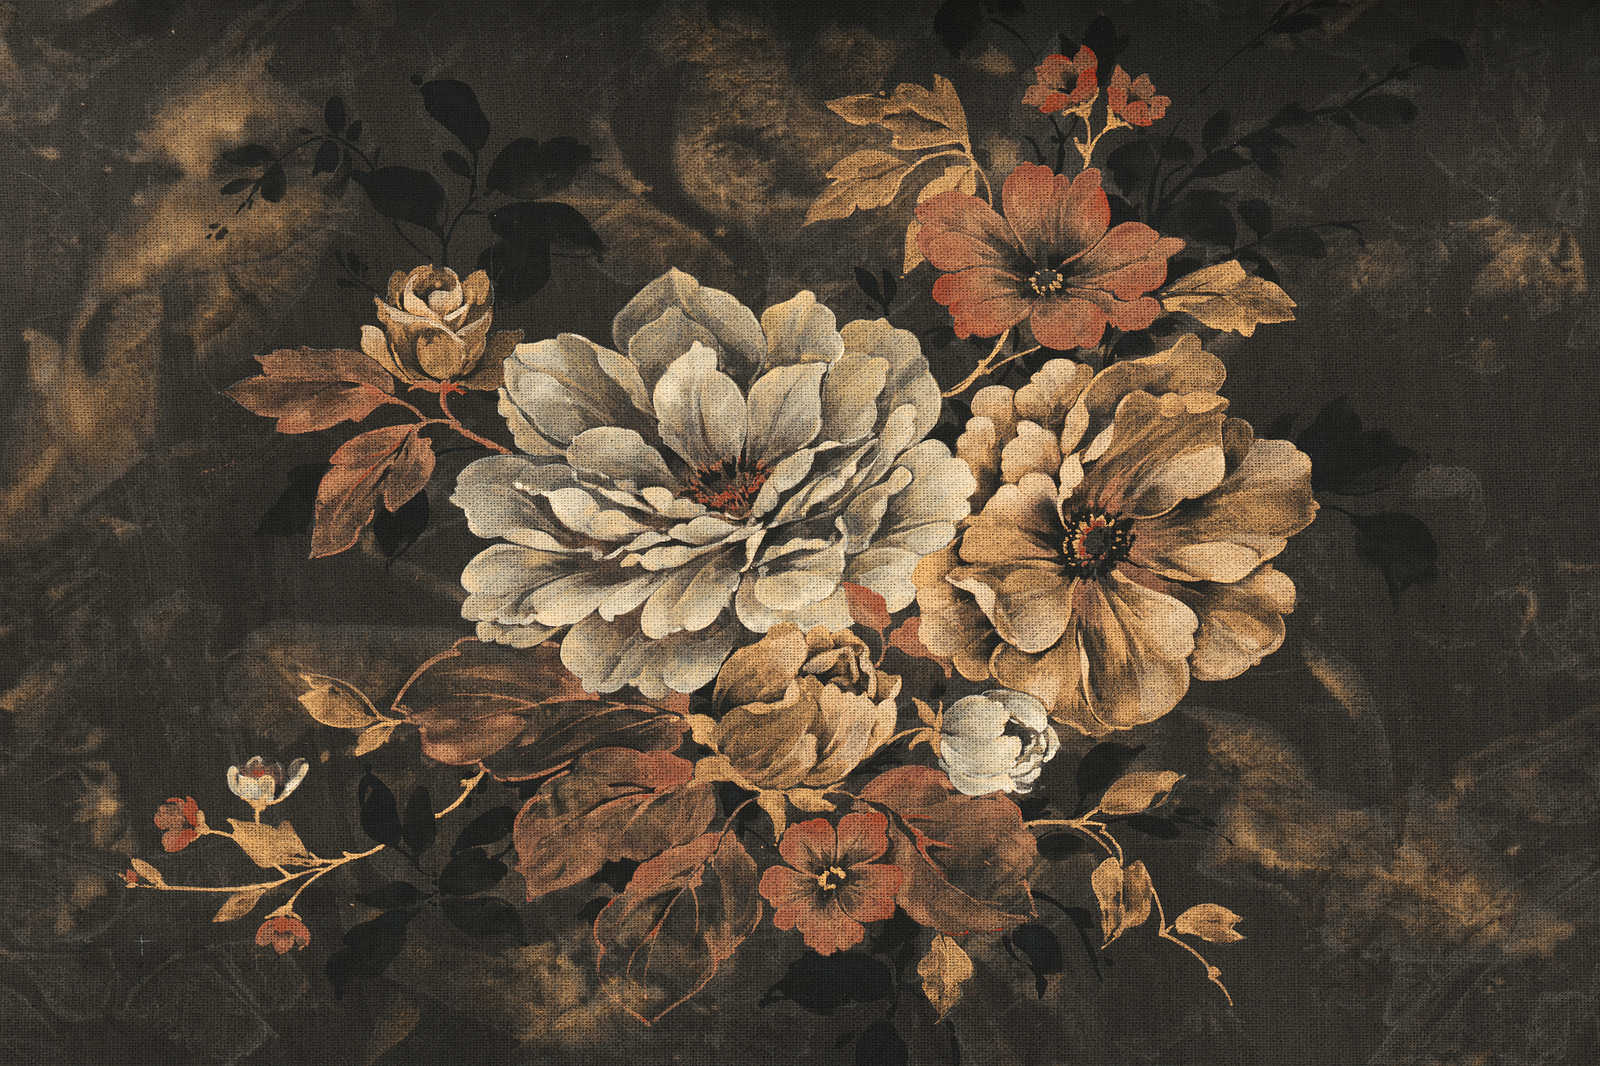             Canvas painting flower design, oil painting in vintage look - 1.20 m x 0.80 m
        